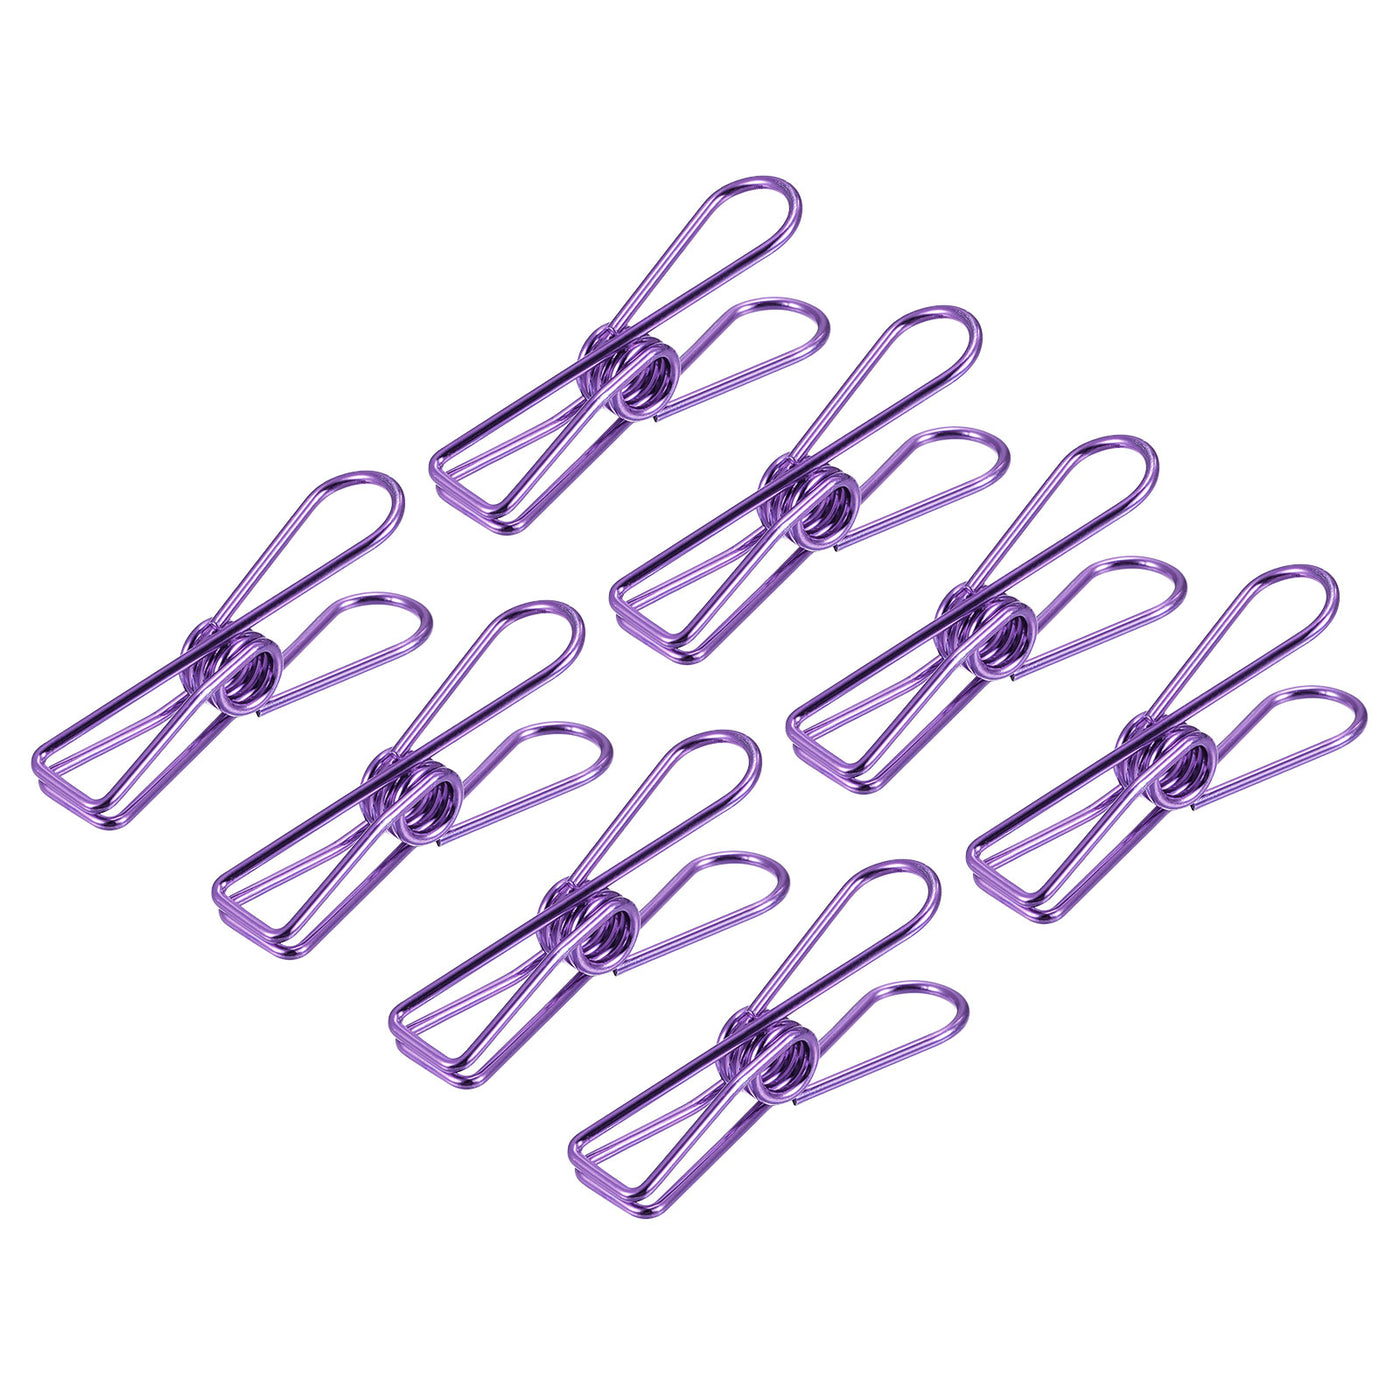 uxcell Uxcell Tablecloth Clips, 32mm Carbon Steel Clamps for Fixing Table Cloth, Purple 16 Pcs